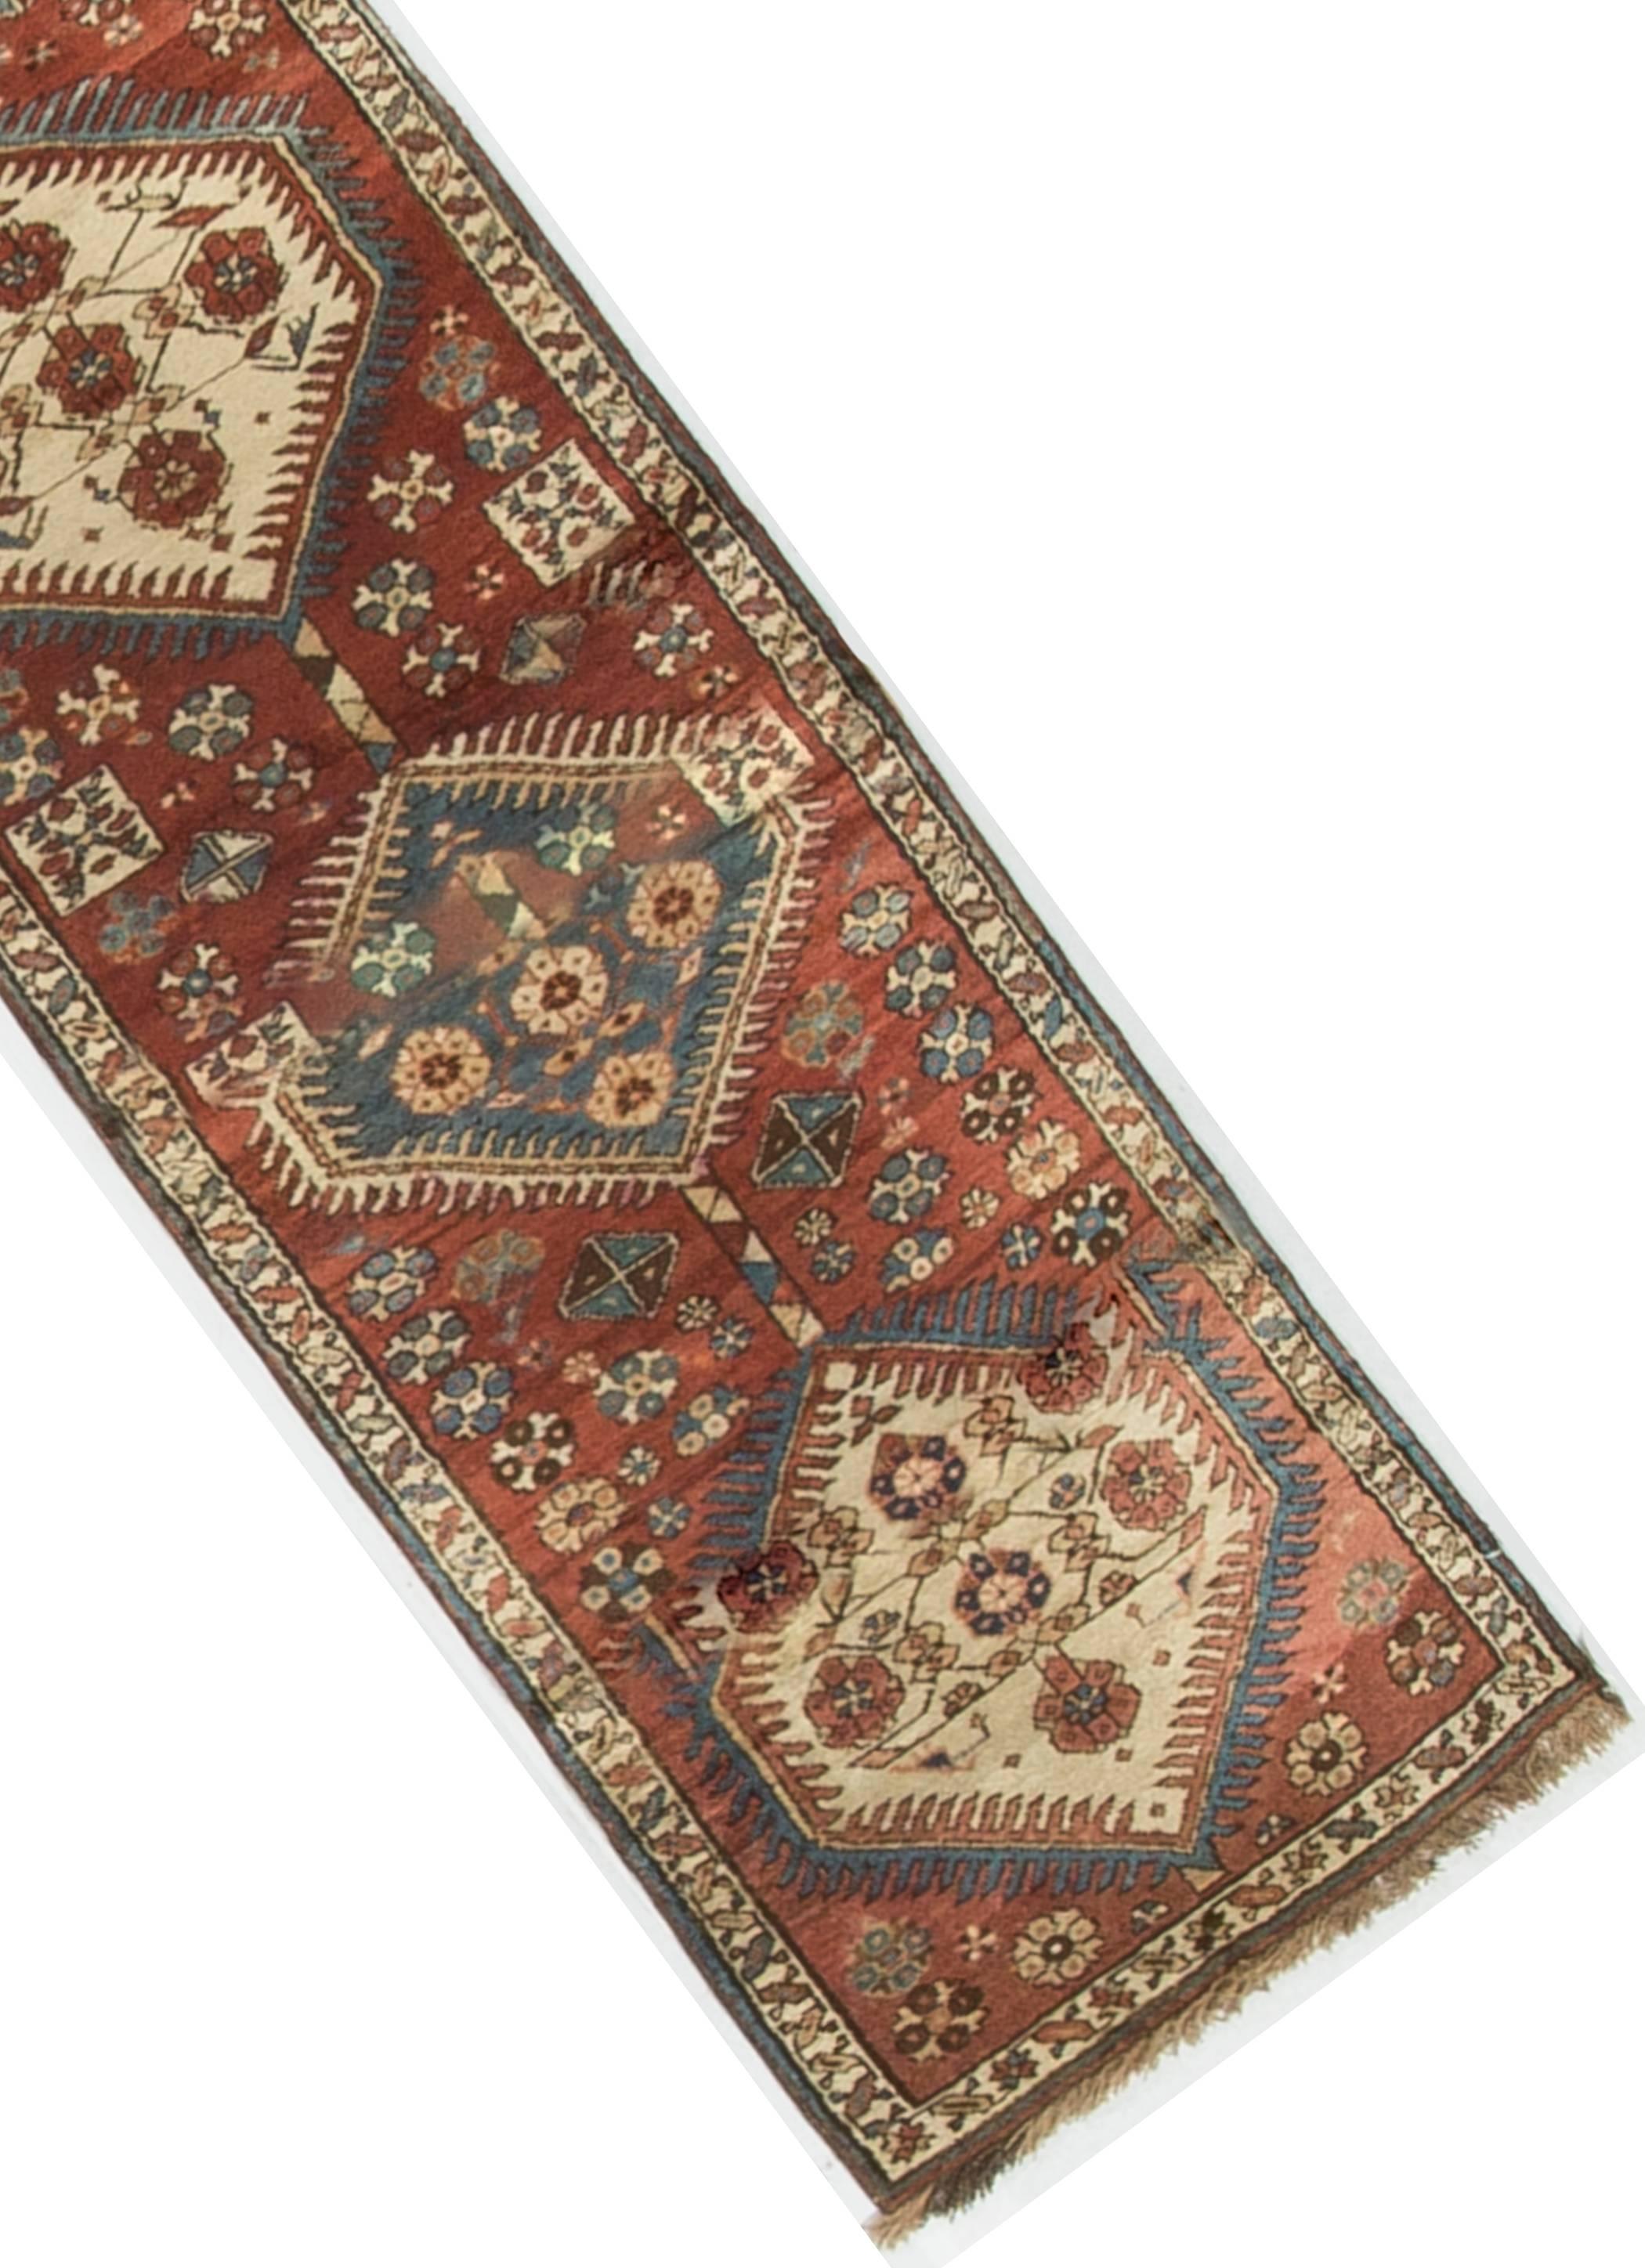 A vintage handwoven Persian Meshkin rug. Meshkin is in the northwest Azerbaijan area of Persia. Although not one of the more familiar areas of rug production their rugs have wonderful designs and are of a high quality.